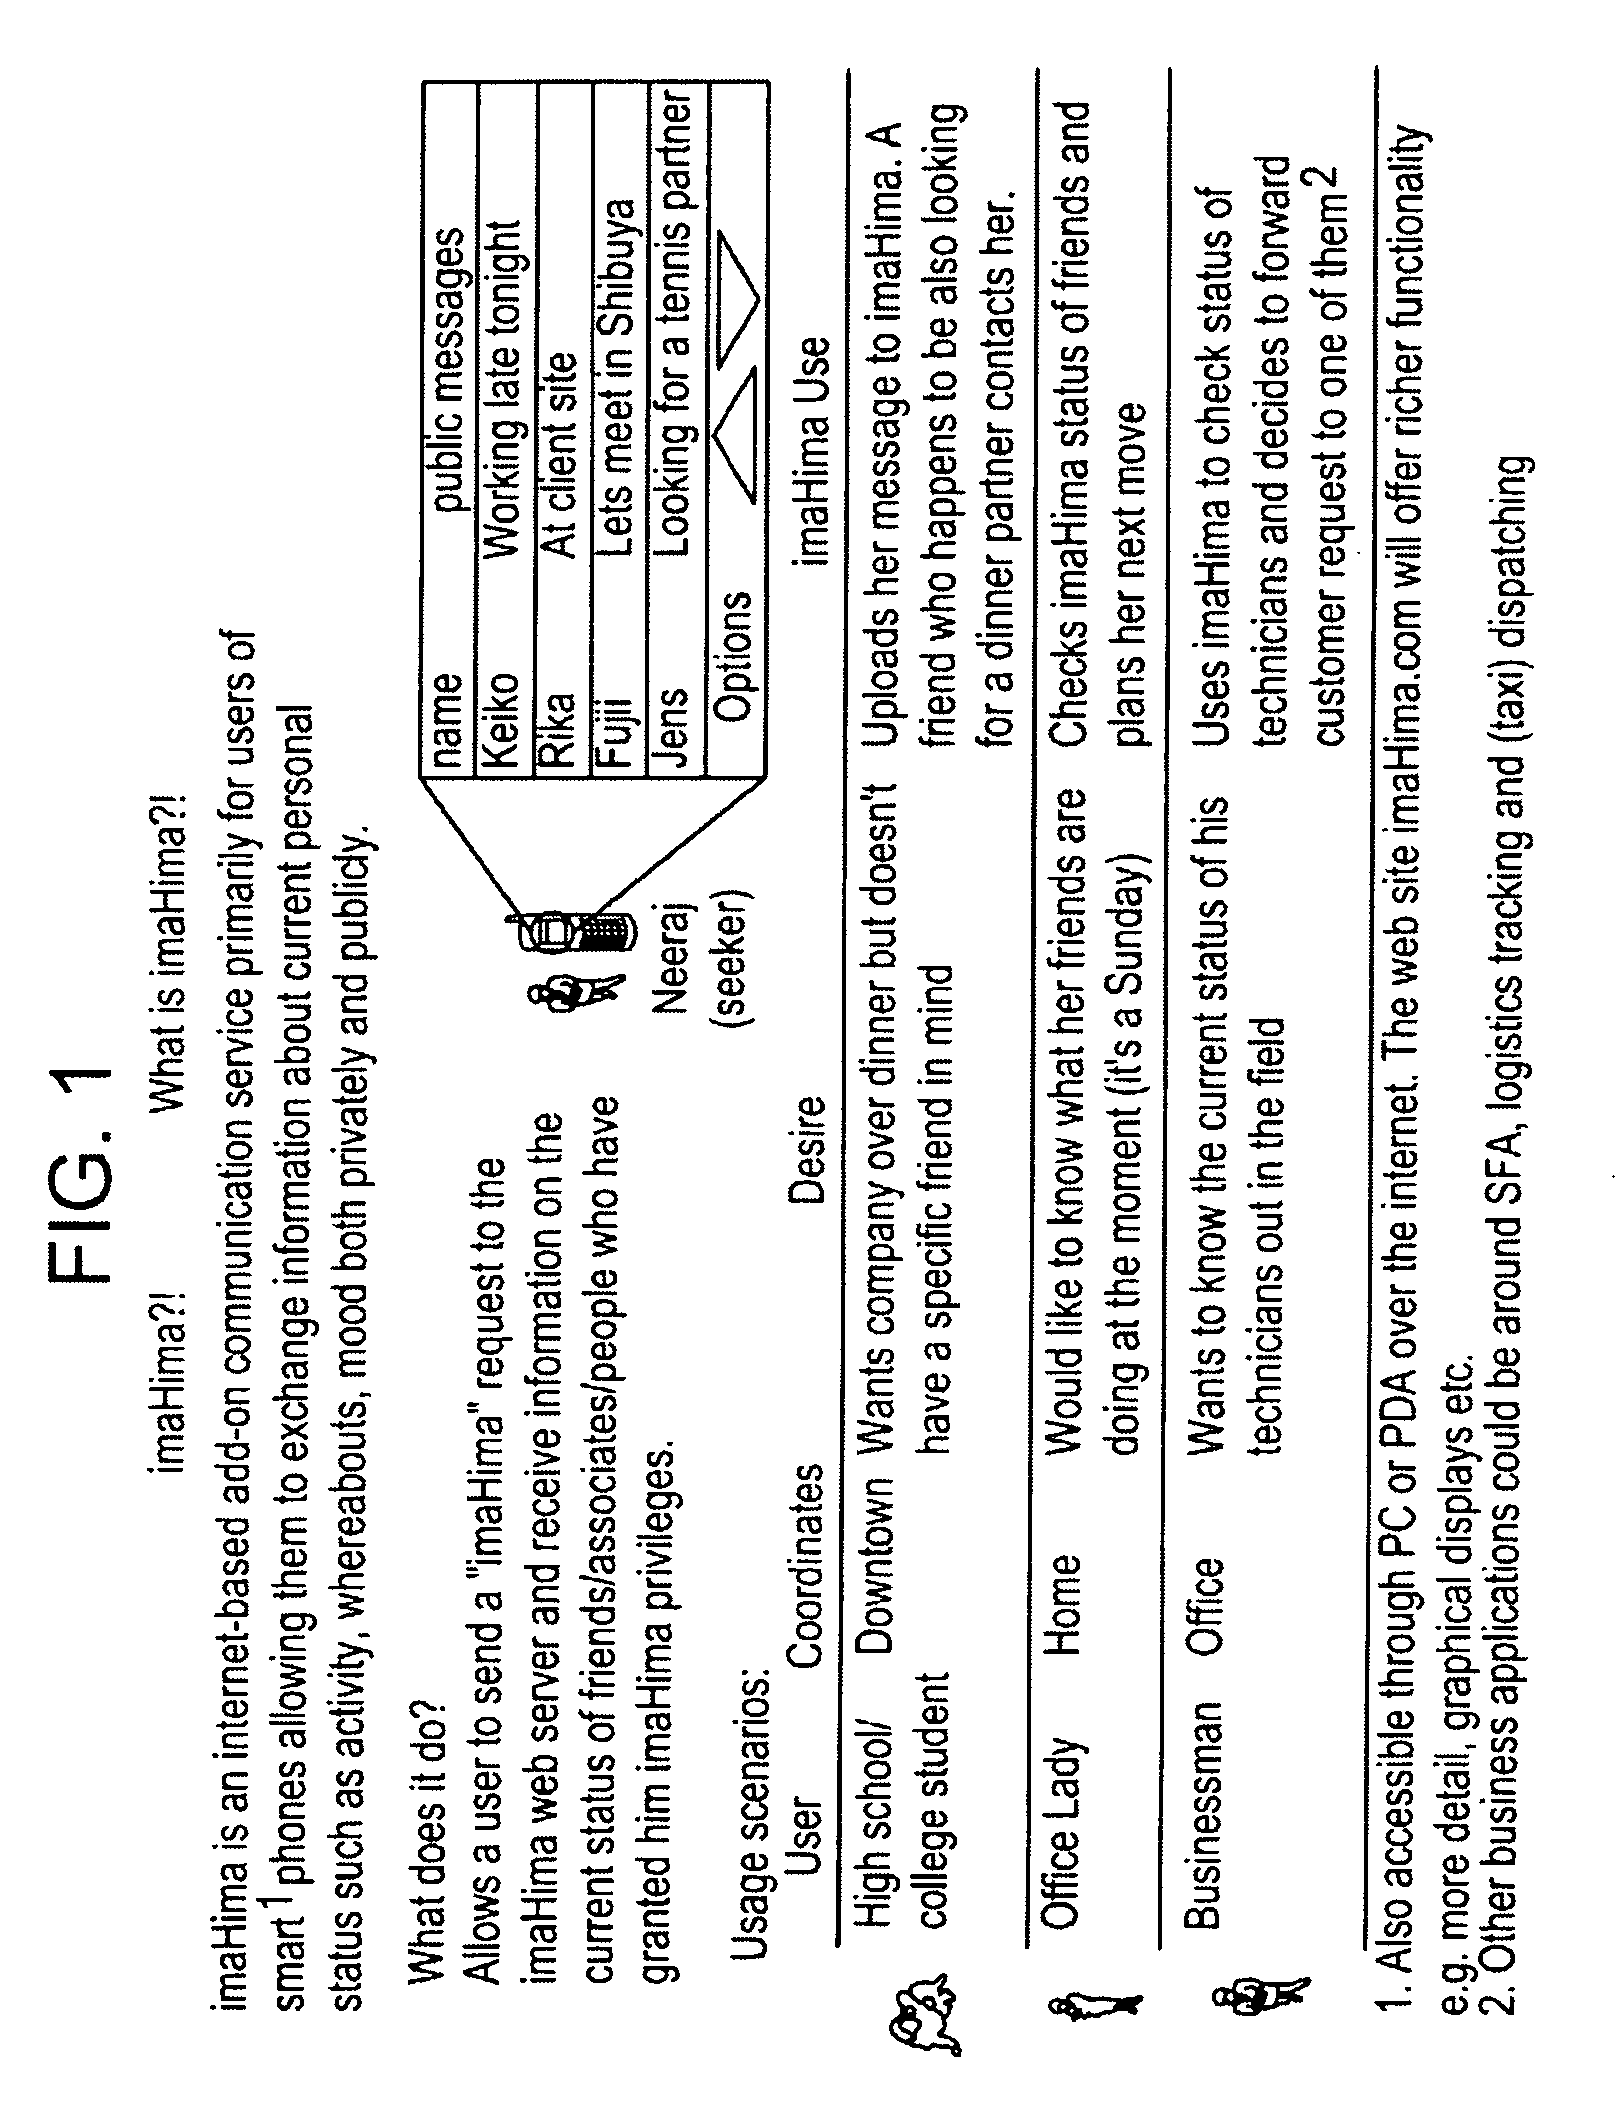 Systems for communicating current and future activity information among mobile internet users and methods therefor